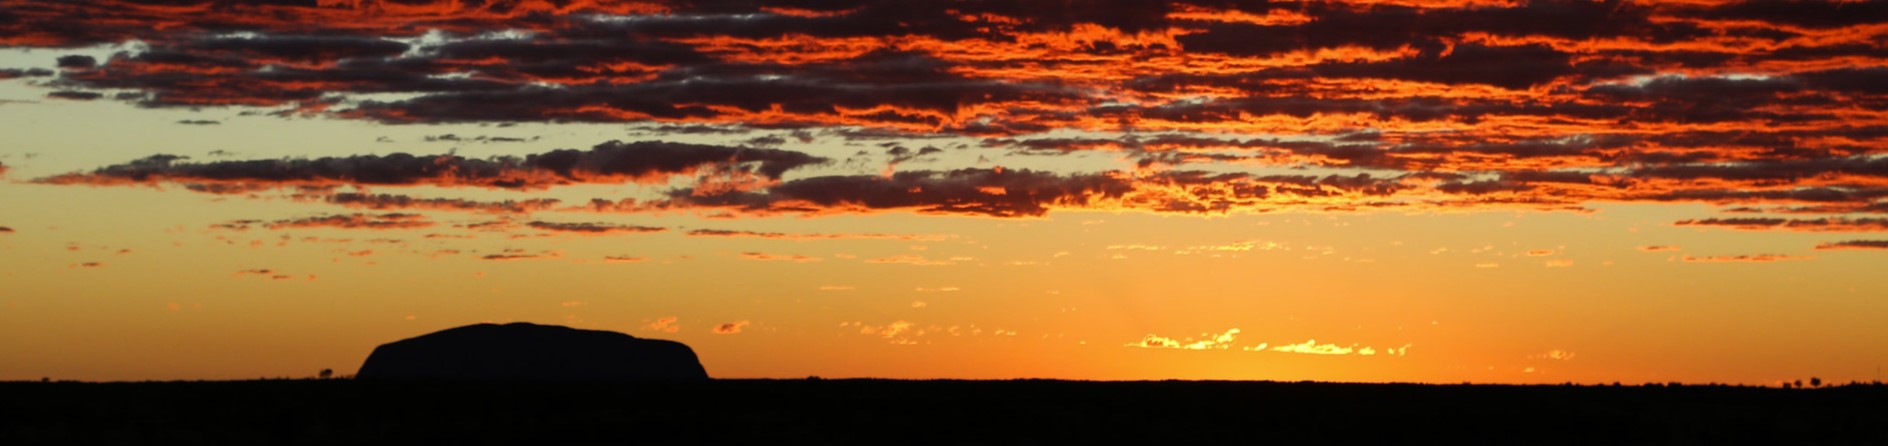 Uluru Sunrise and Sunset Tours are available now